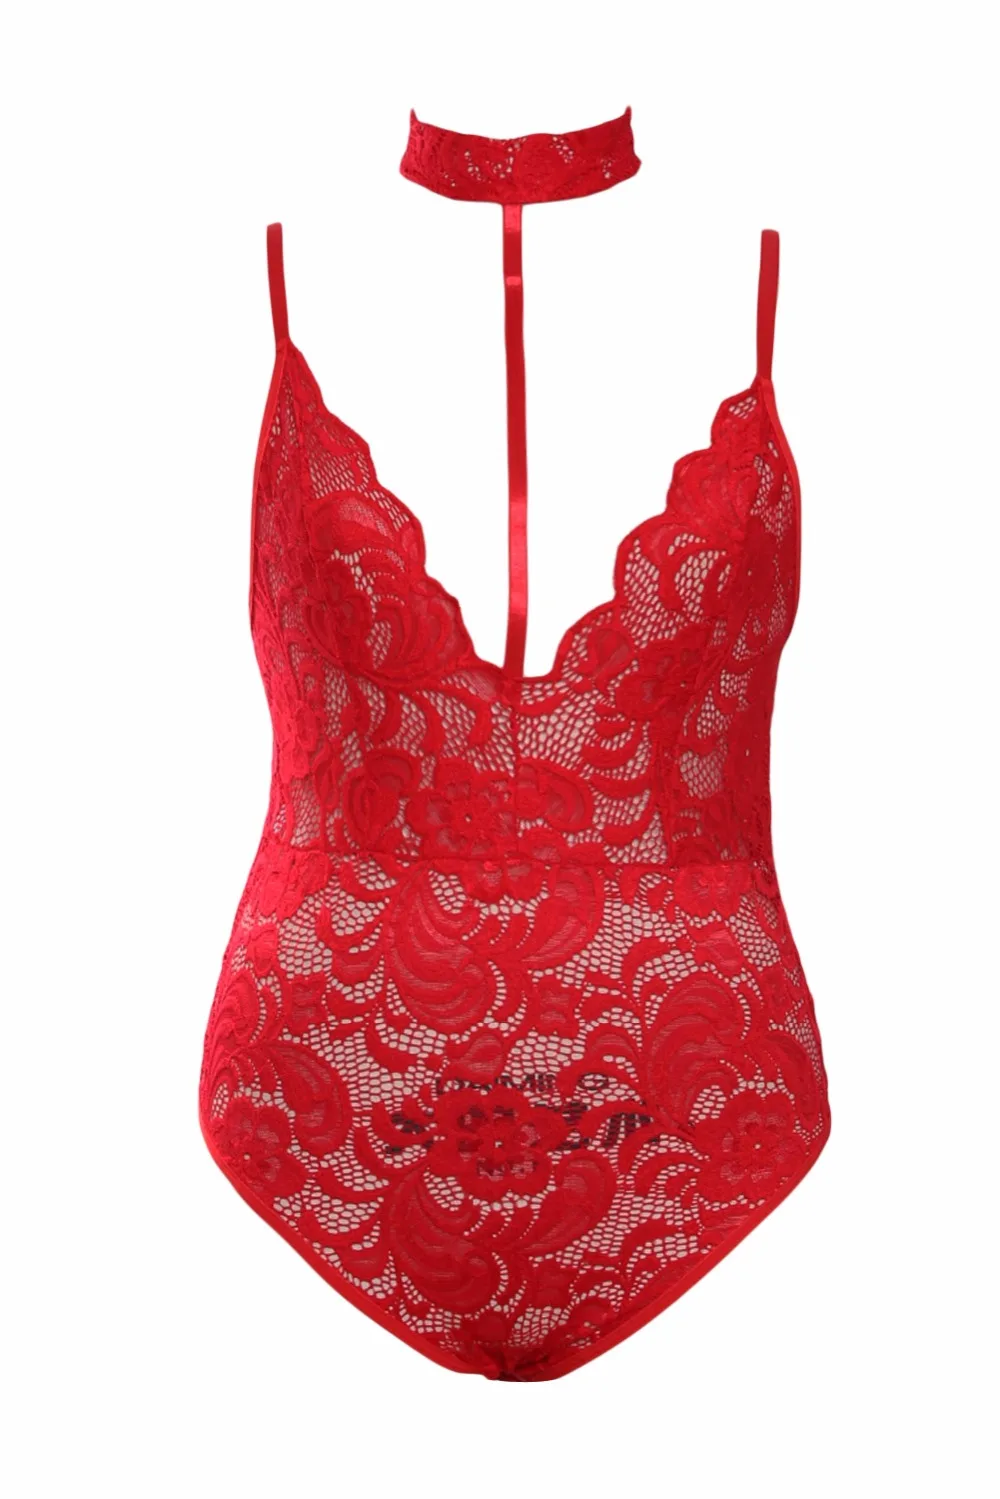 Hot-Red-Sheer-Lace-Choker-Neck-Teddy-Lingerie-LC32139-103-3